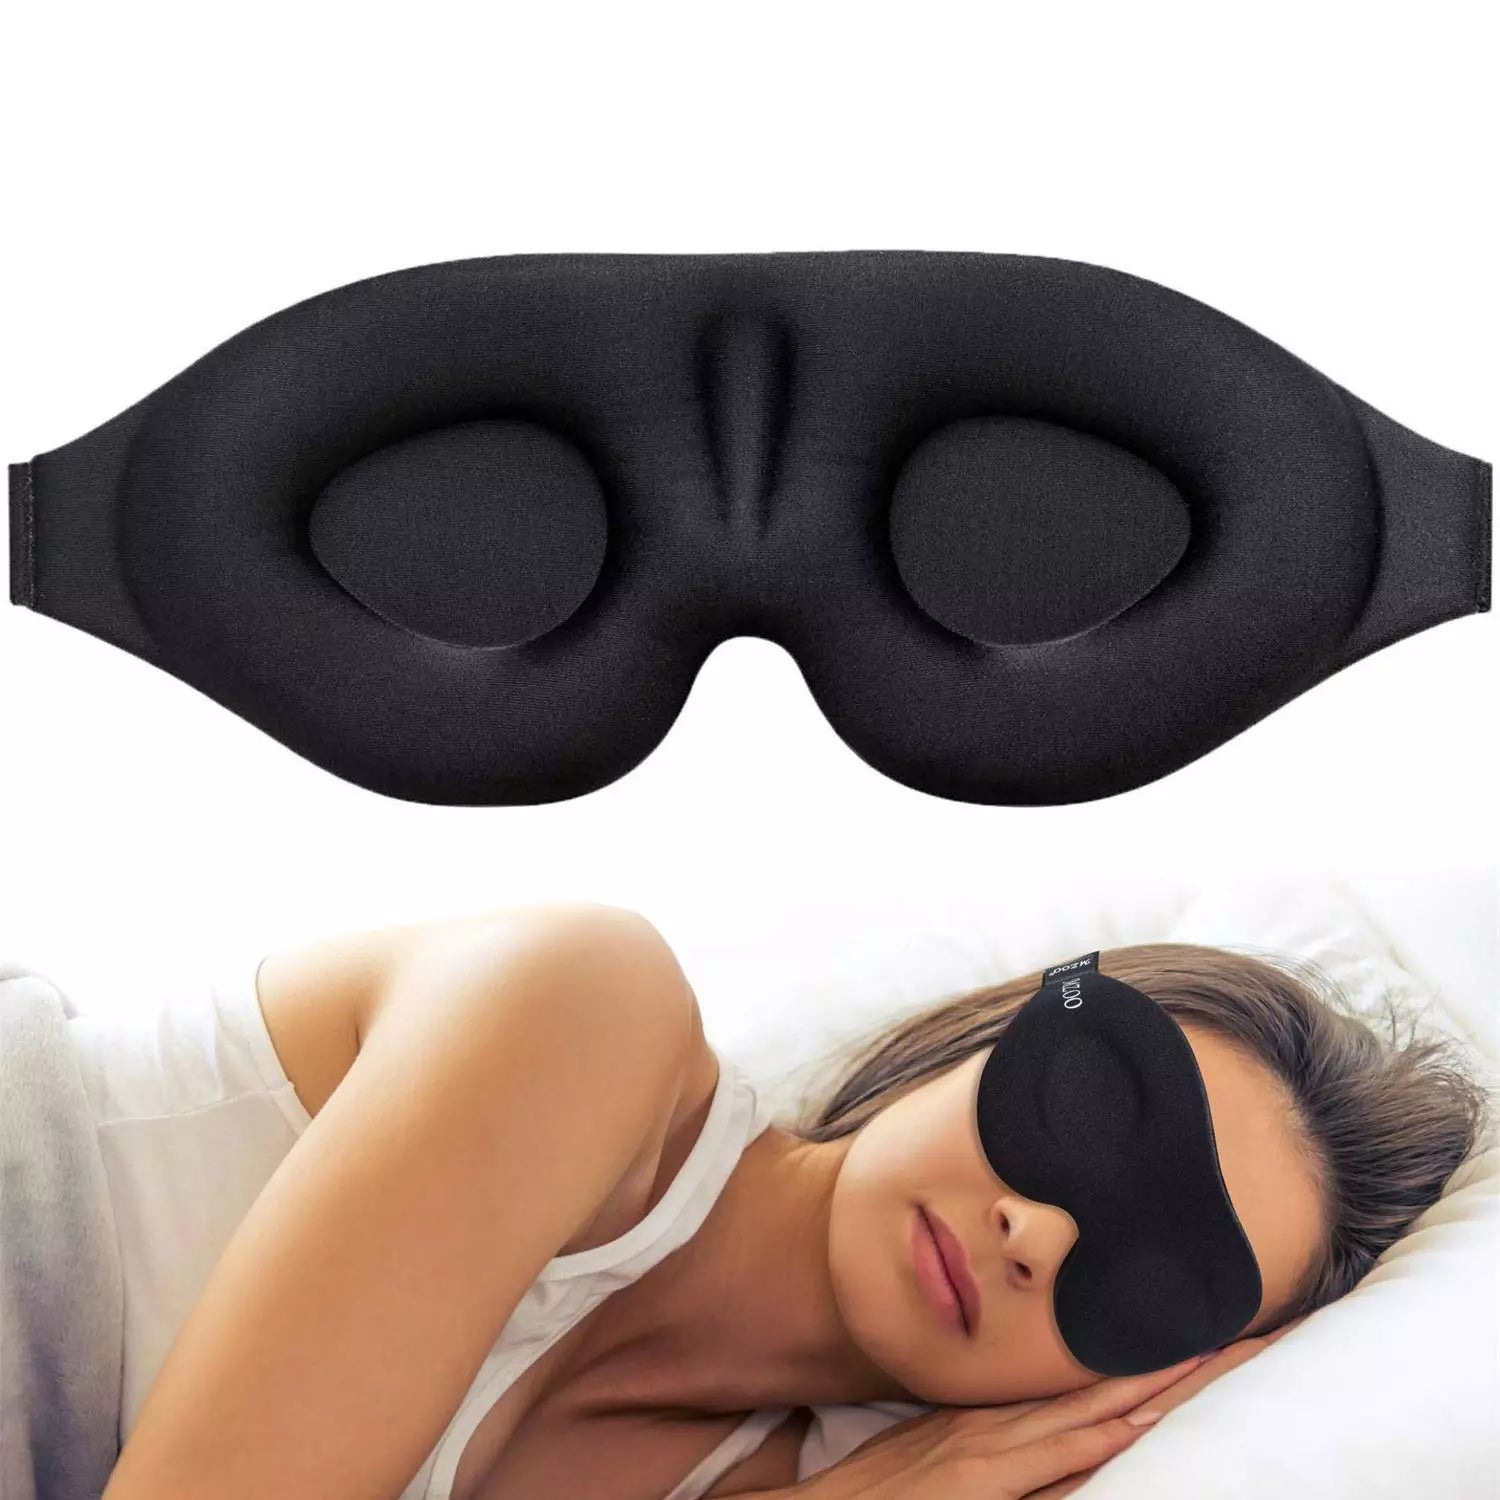 Eye Mask for Sleeping 3D Contoured Cup Blindfold Concave Molded Night Sleep Mask Block Out Light with Women Men